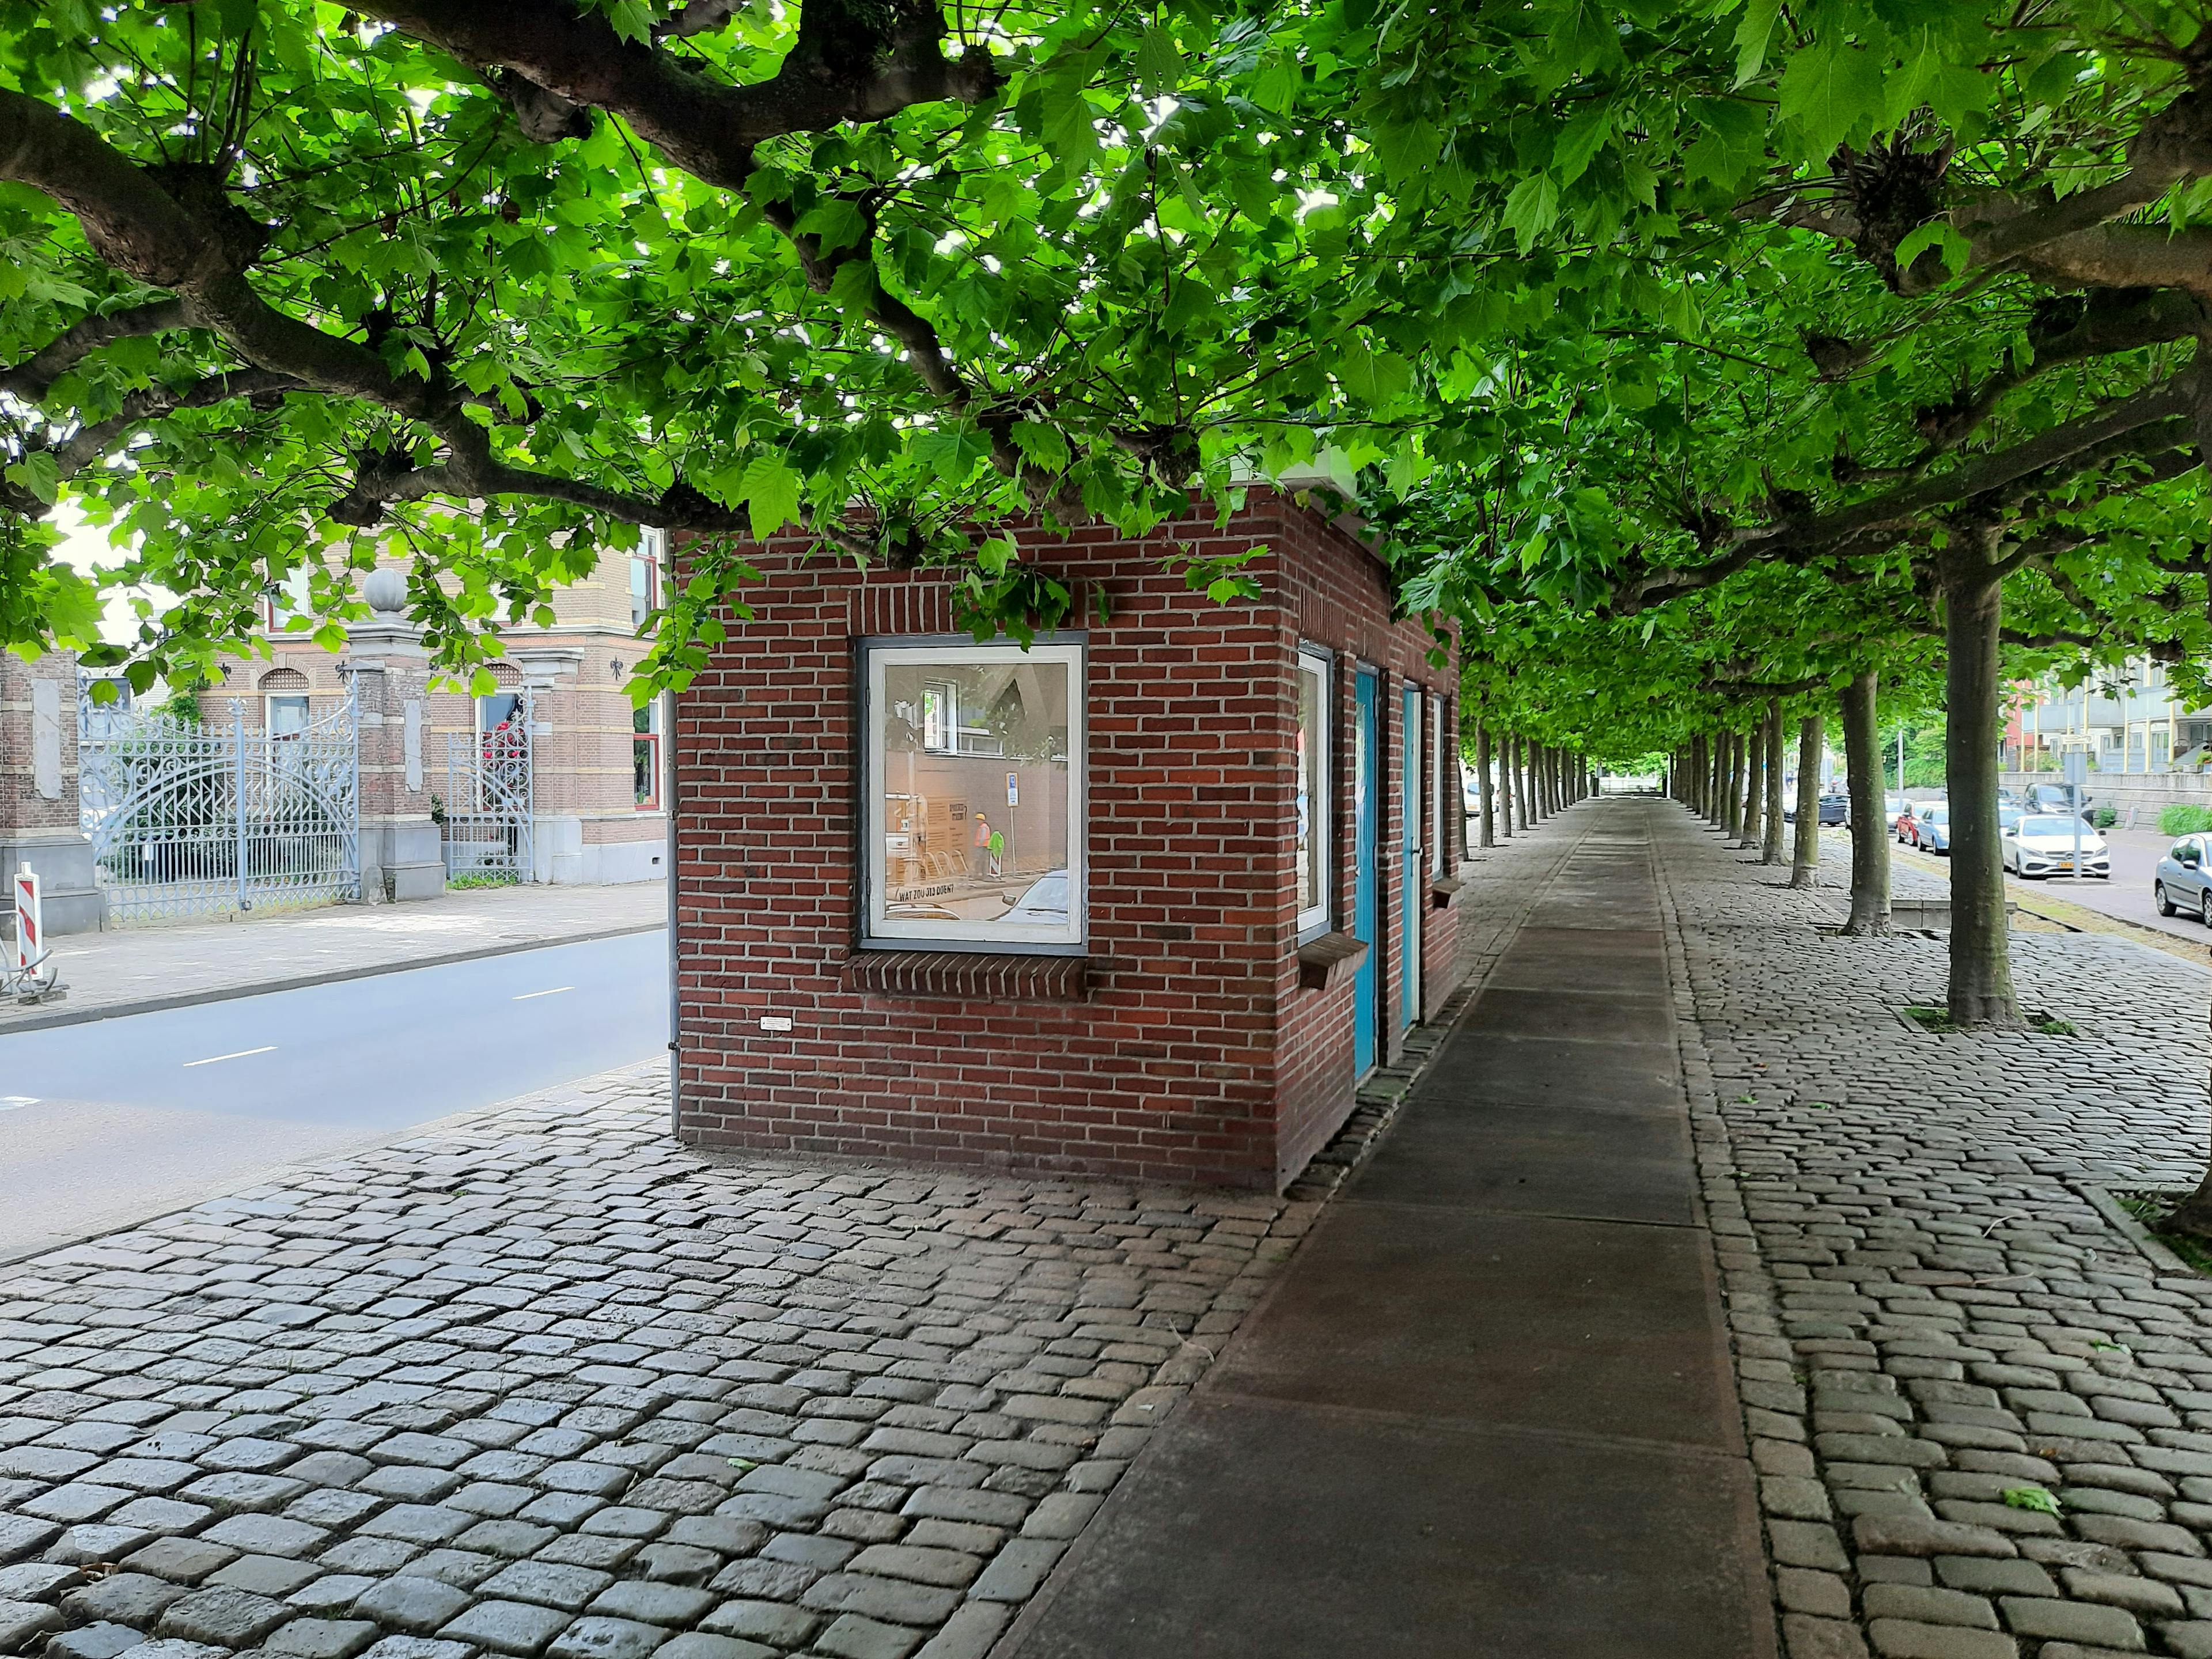 Contemporary art in the smallest museum in the Netherlands